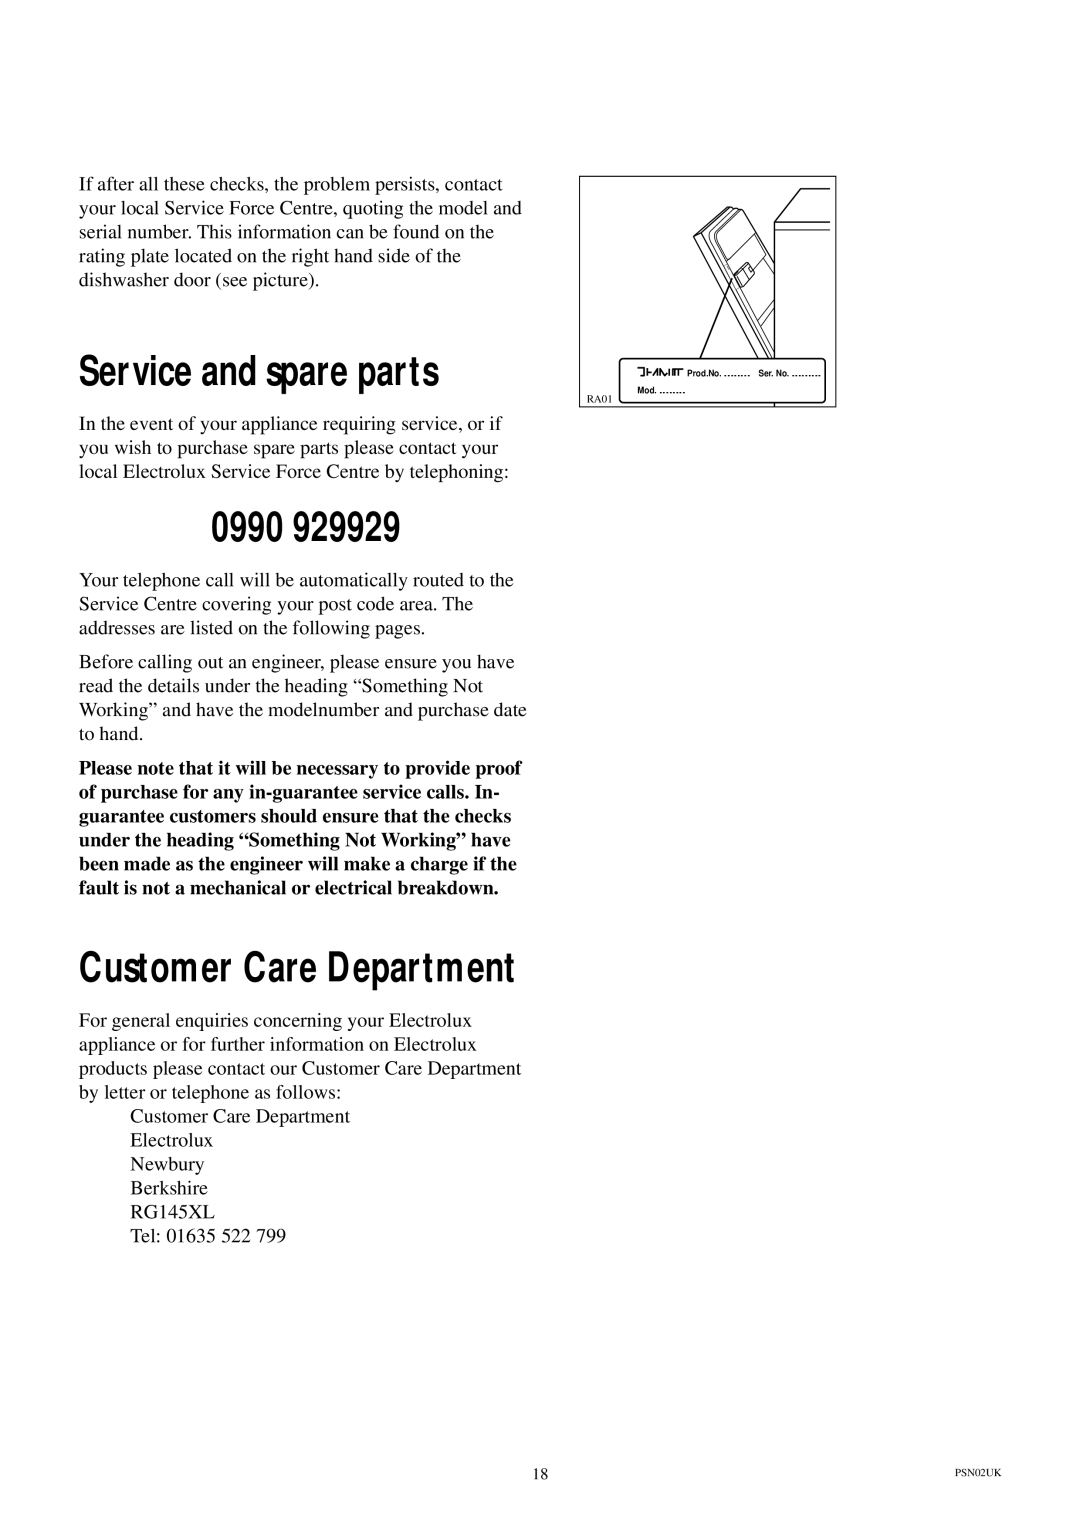 Electrolux ESI 600 manual Service and spare parts, 0990 